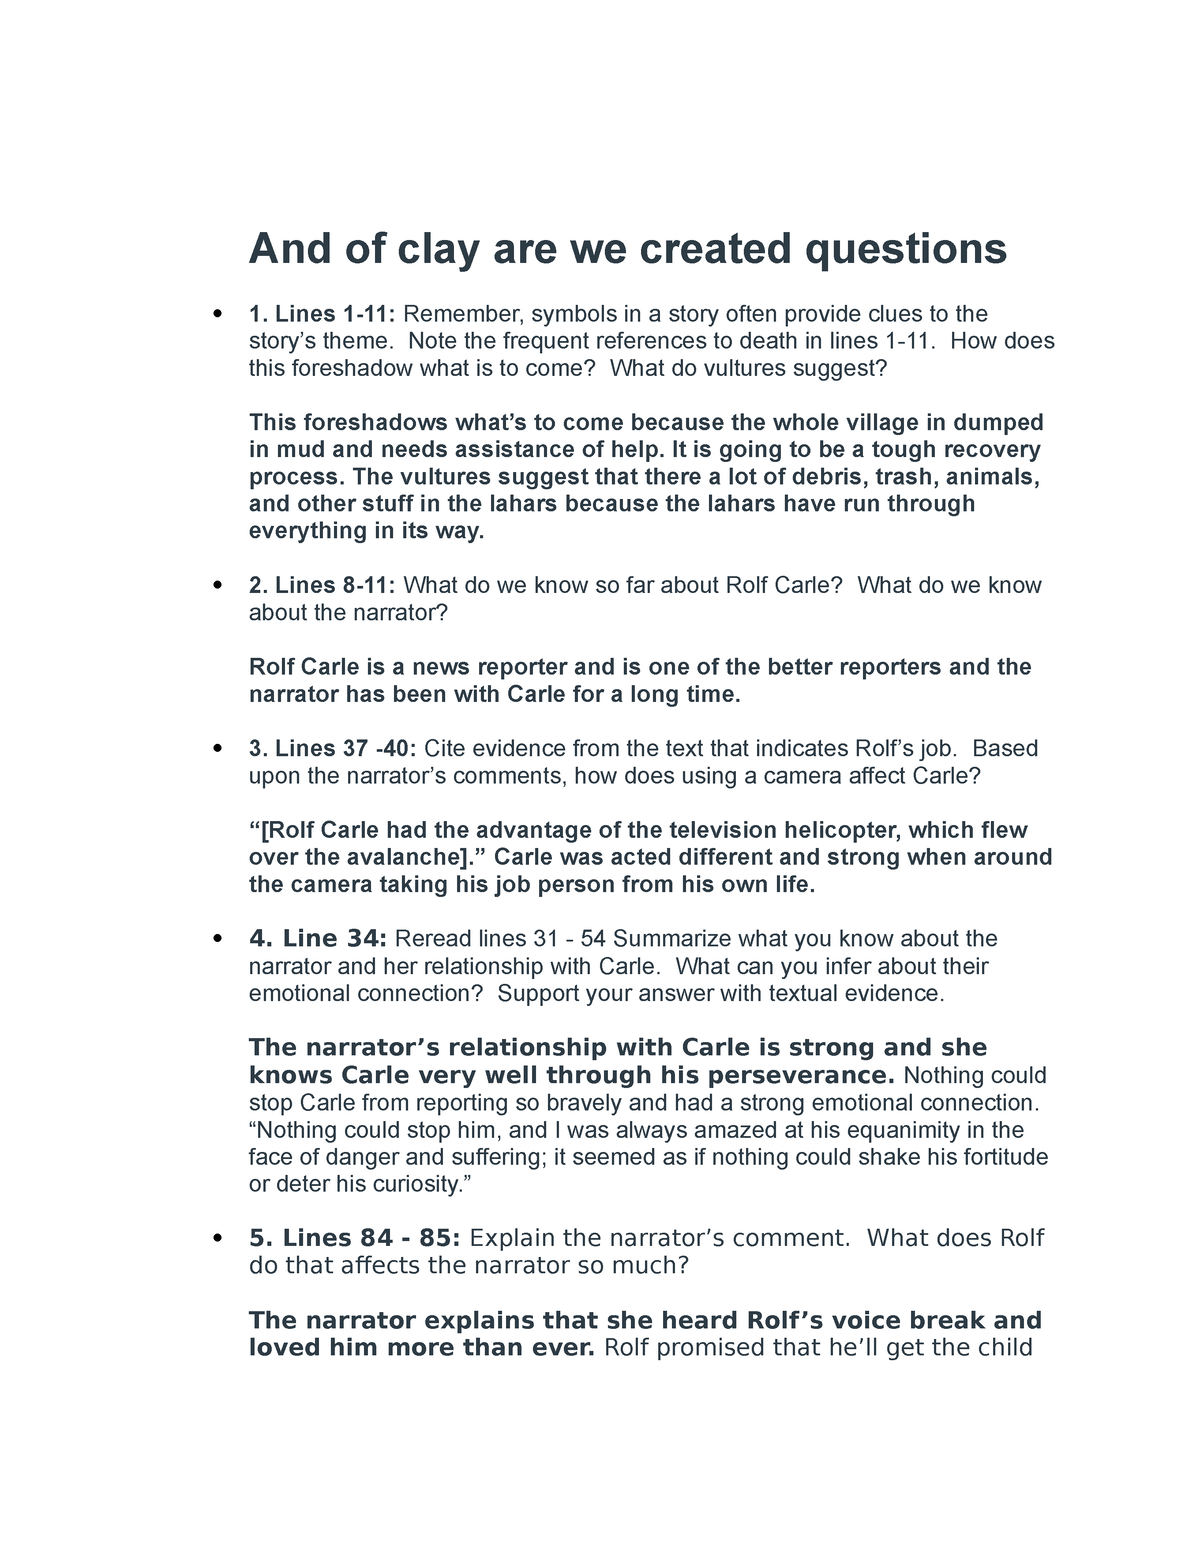 of clay we are created